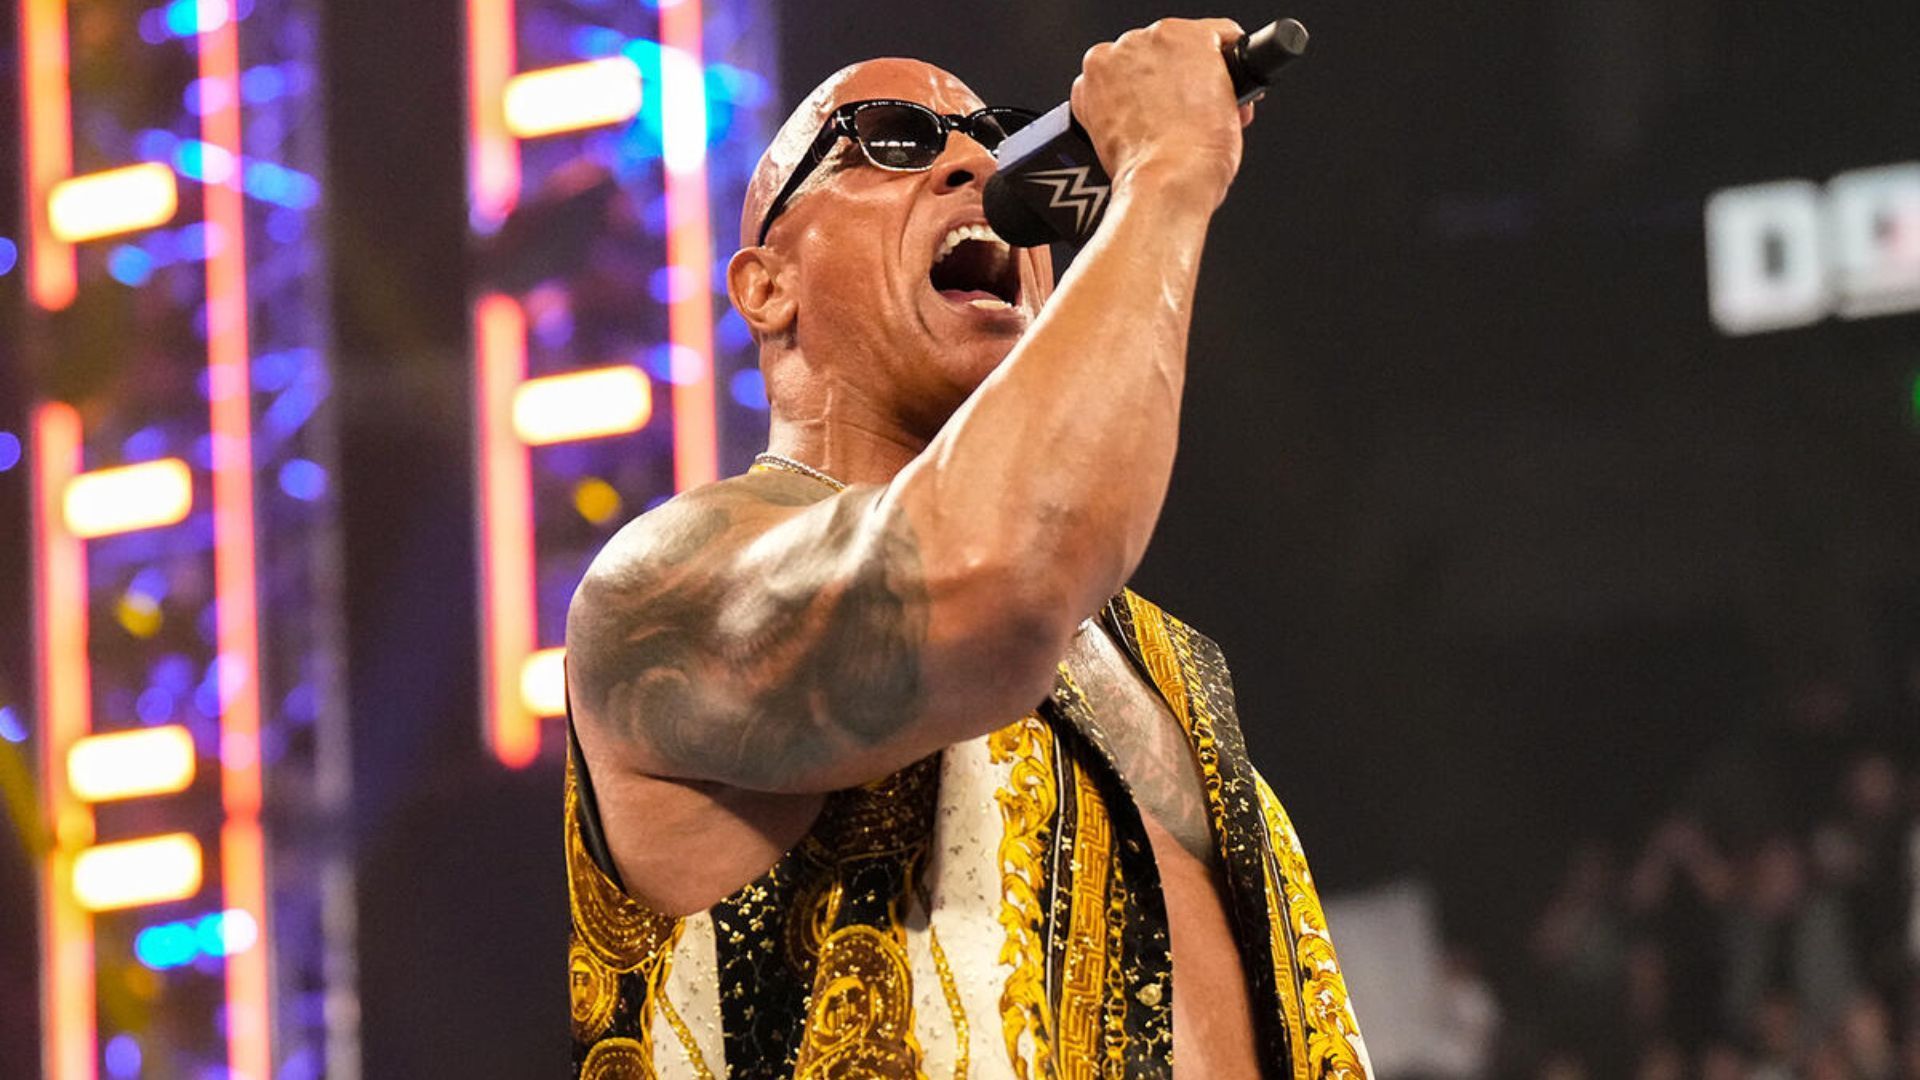 The Rock has been on fire with the mic in his hands